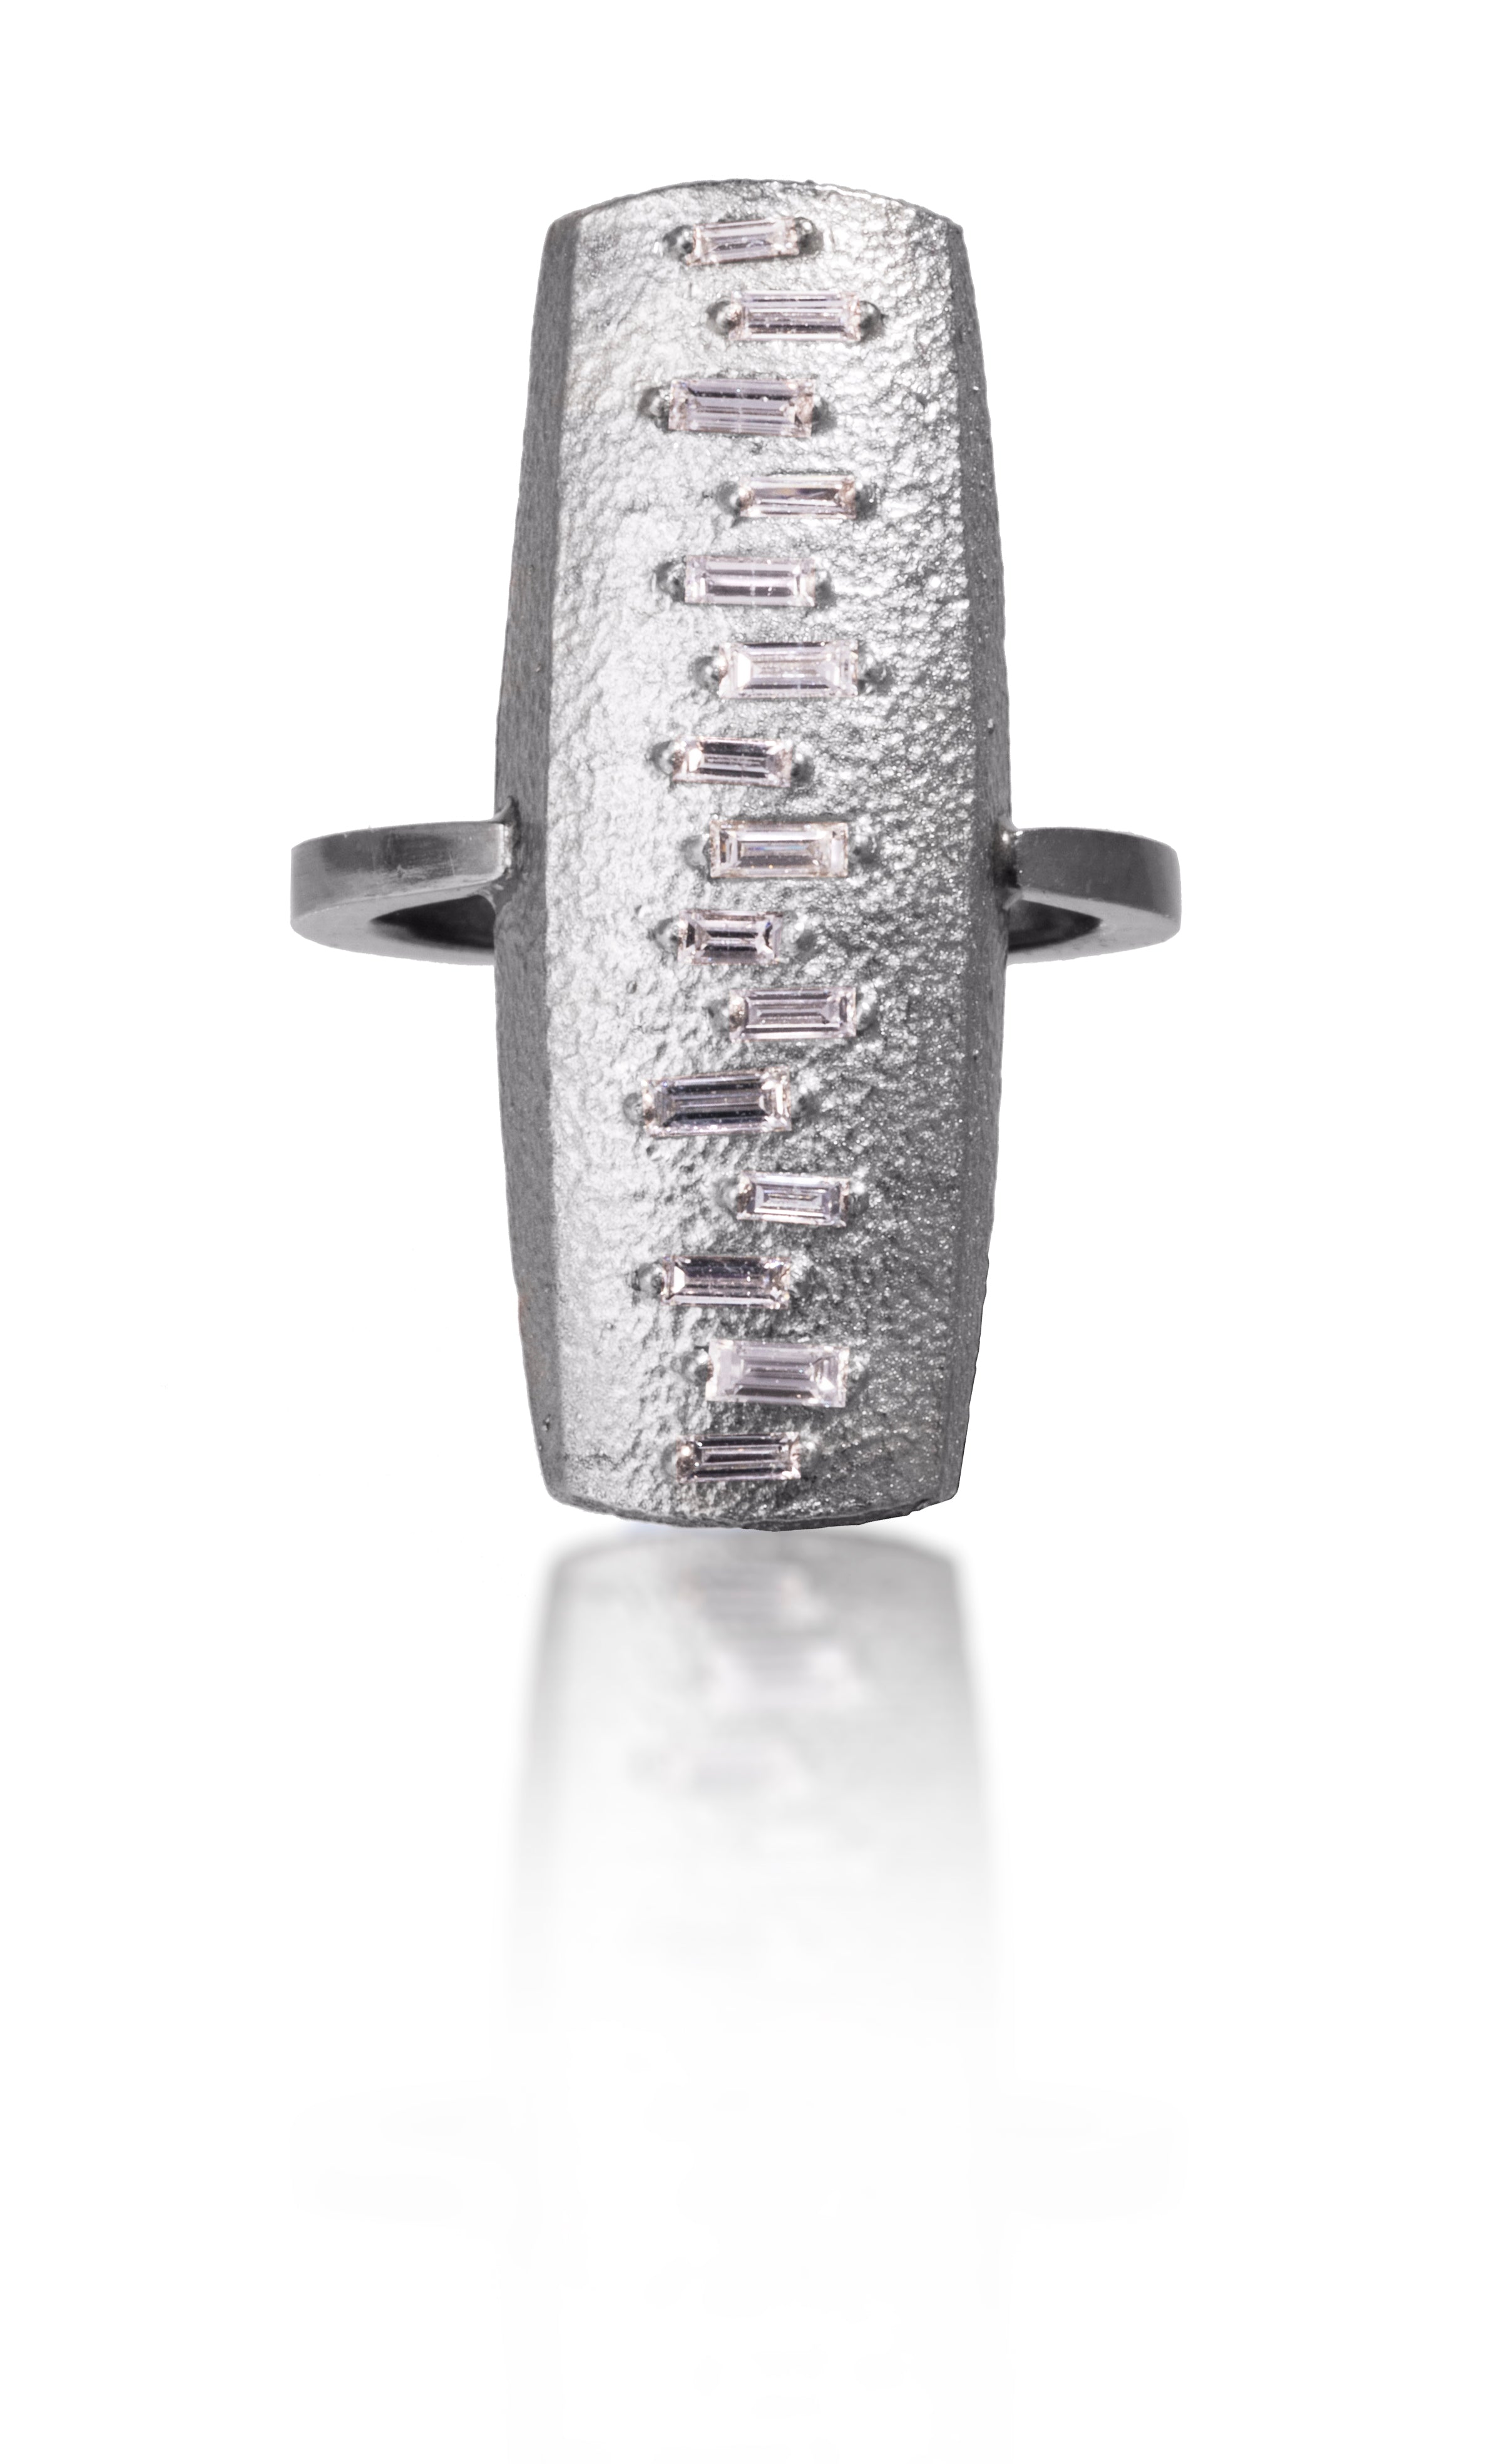 This large pendant ring is set with 15 white diamond baguettes. It is available in three richly textured color ways, oxidized silver, 18k gold, and palladium.  The graceful irregularity of the baguette angles catch the light in exciting ways when worn. 0.4713 tcw.